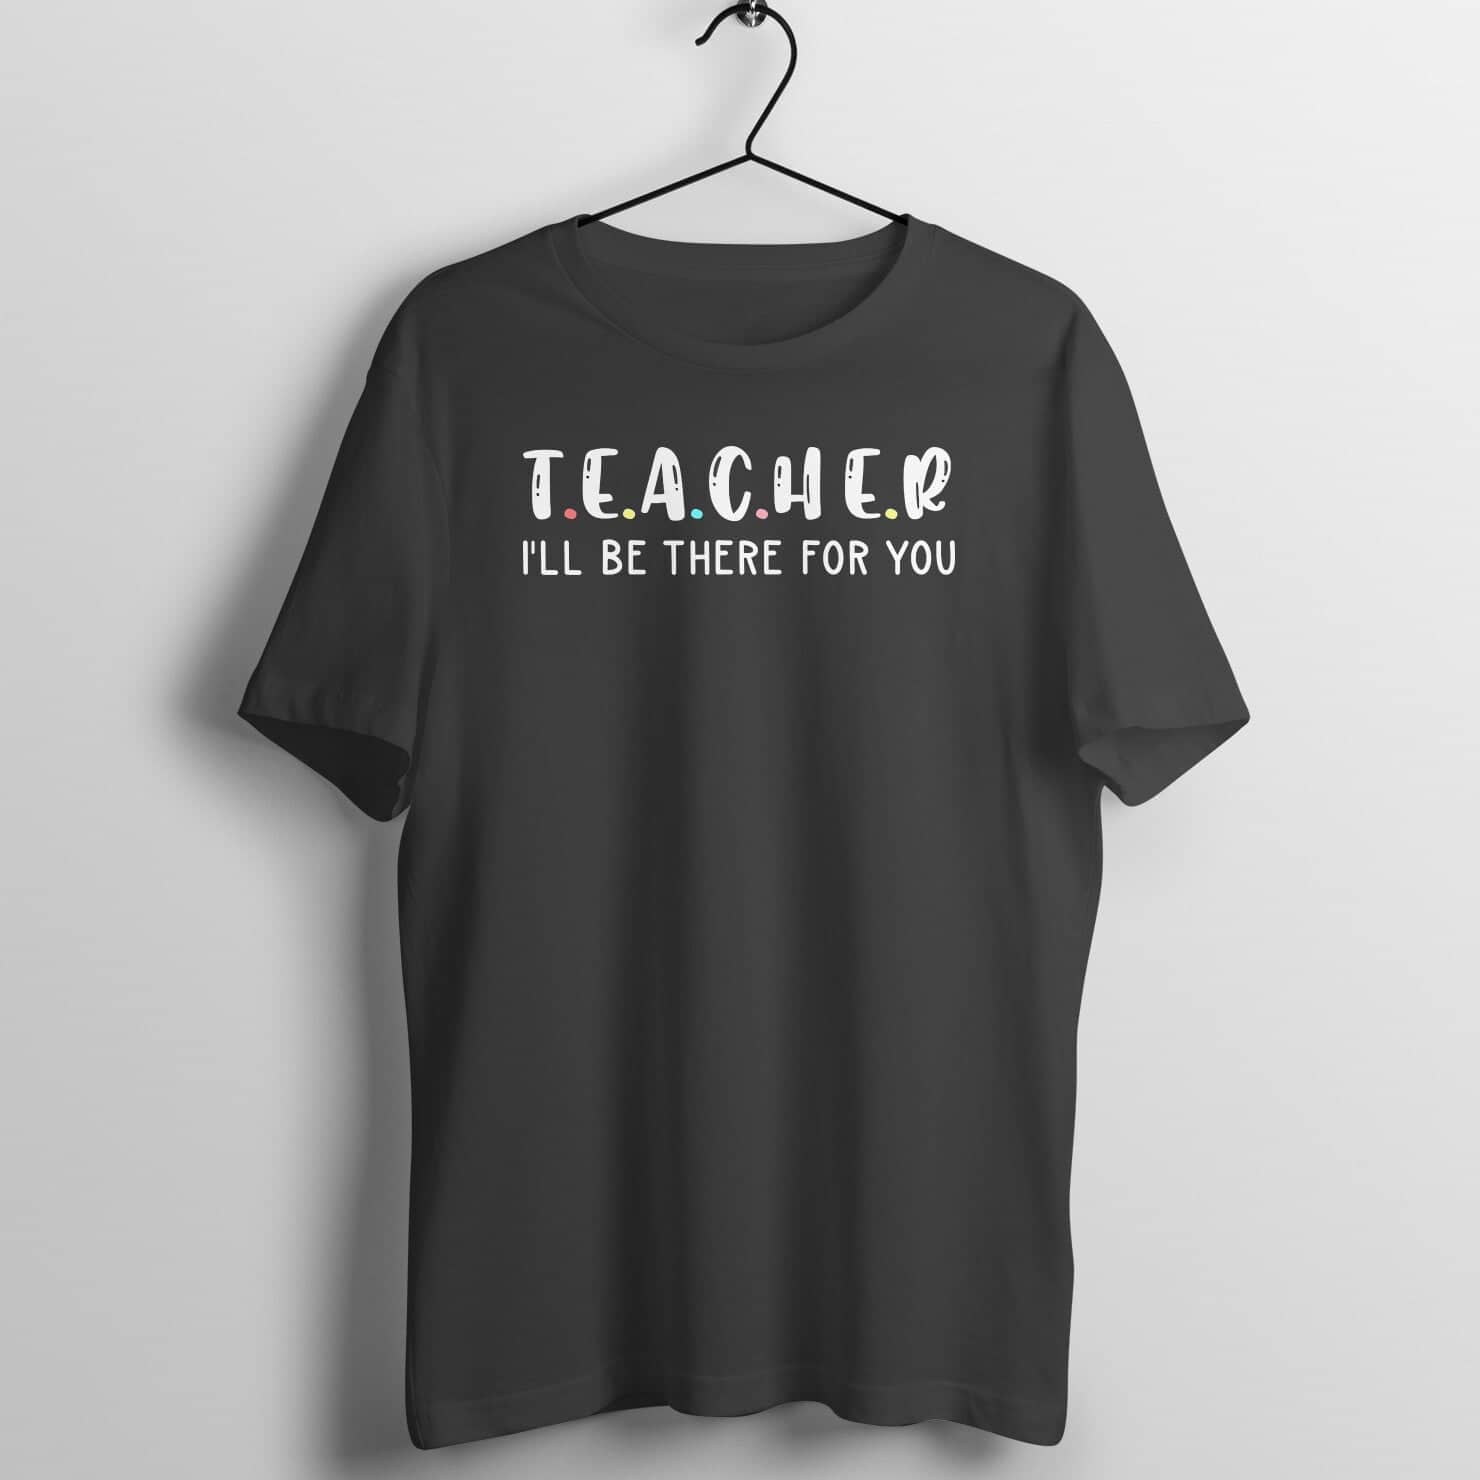 Teacher I'll be There For You Special Black T Shirt for Men and Women Teachers Printrove Black S 